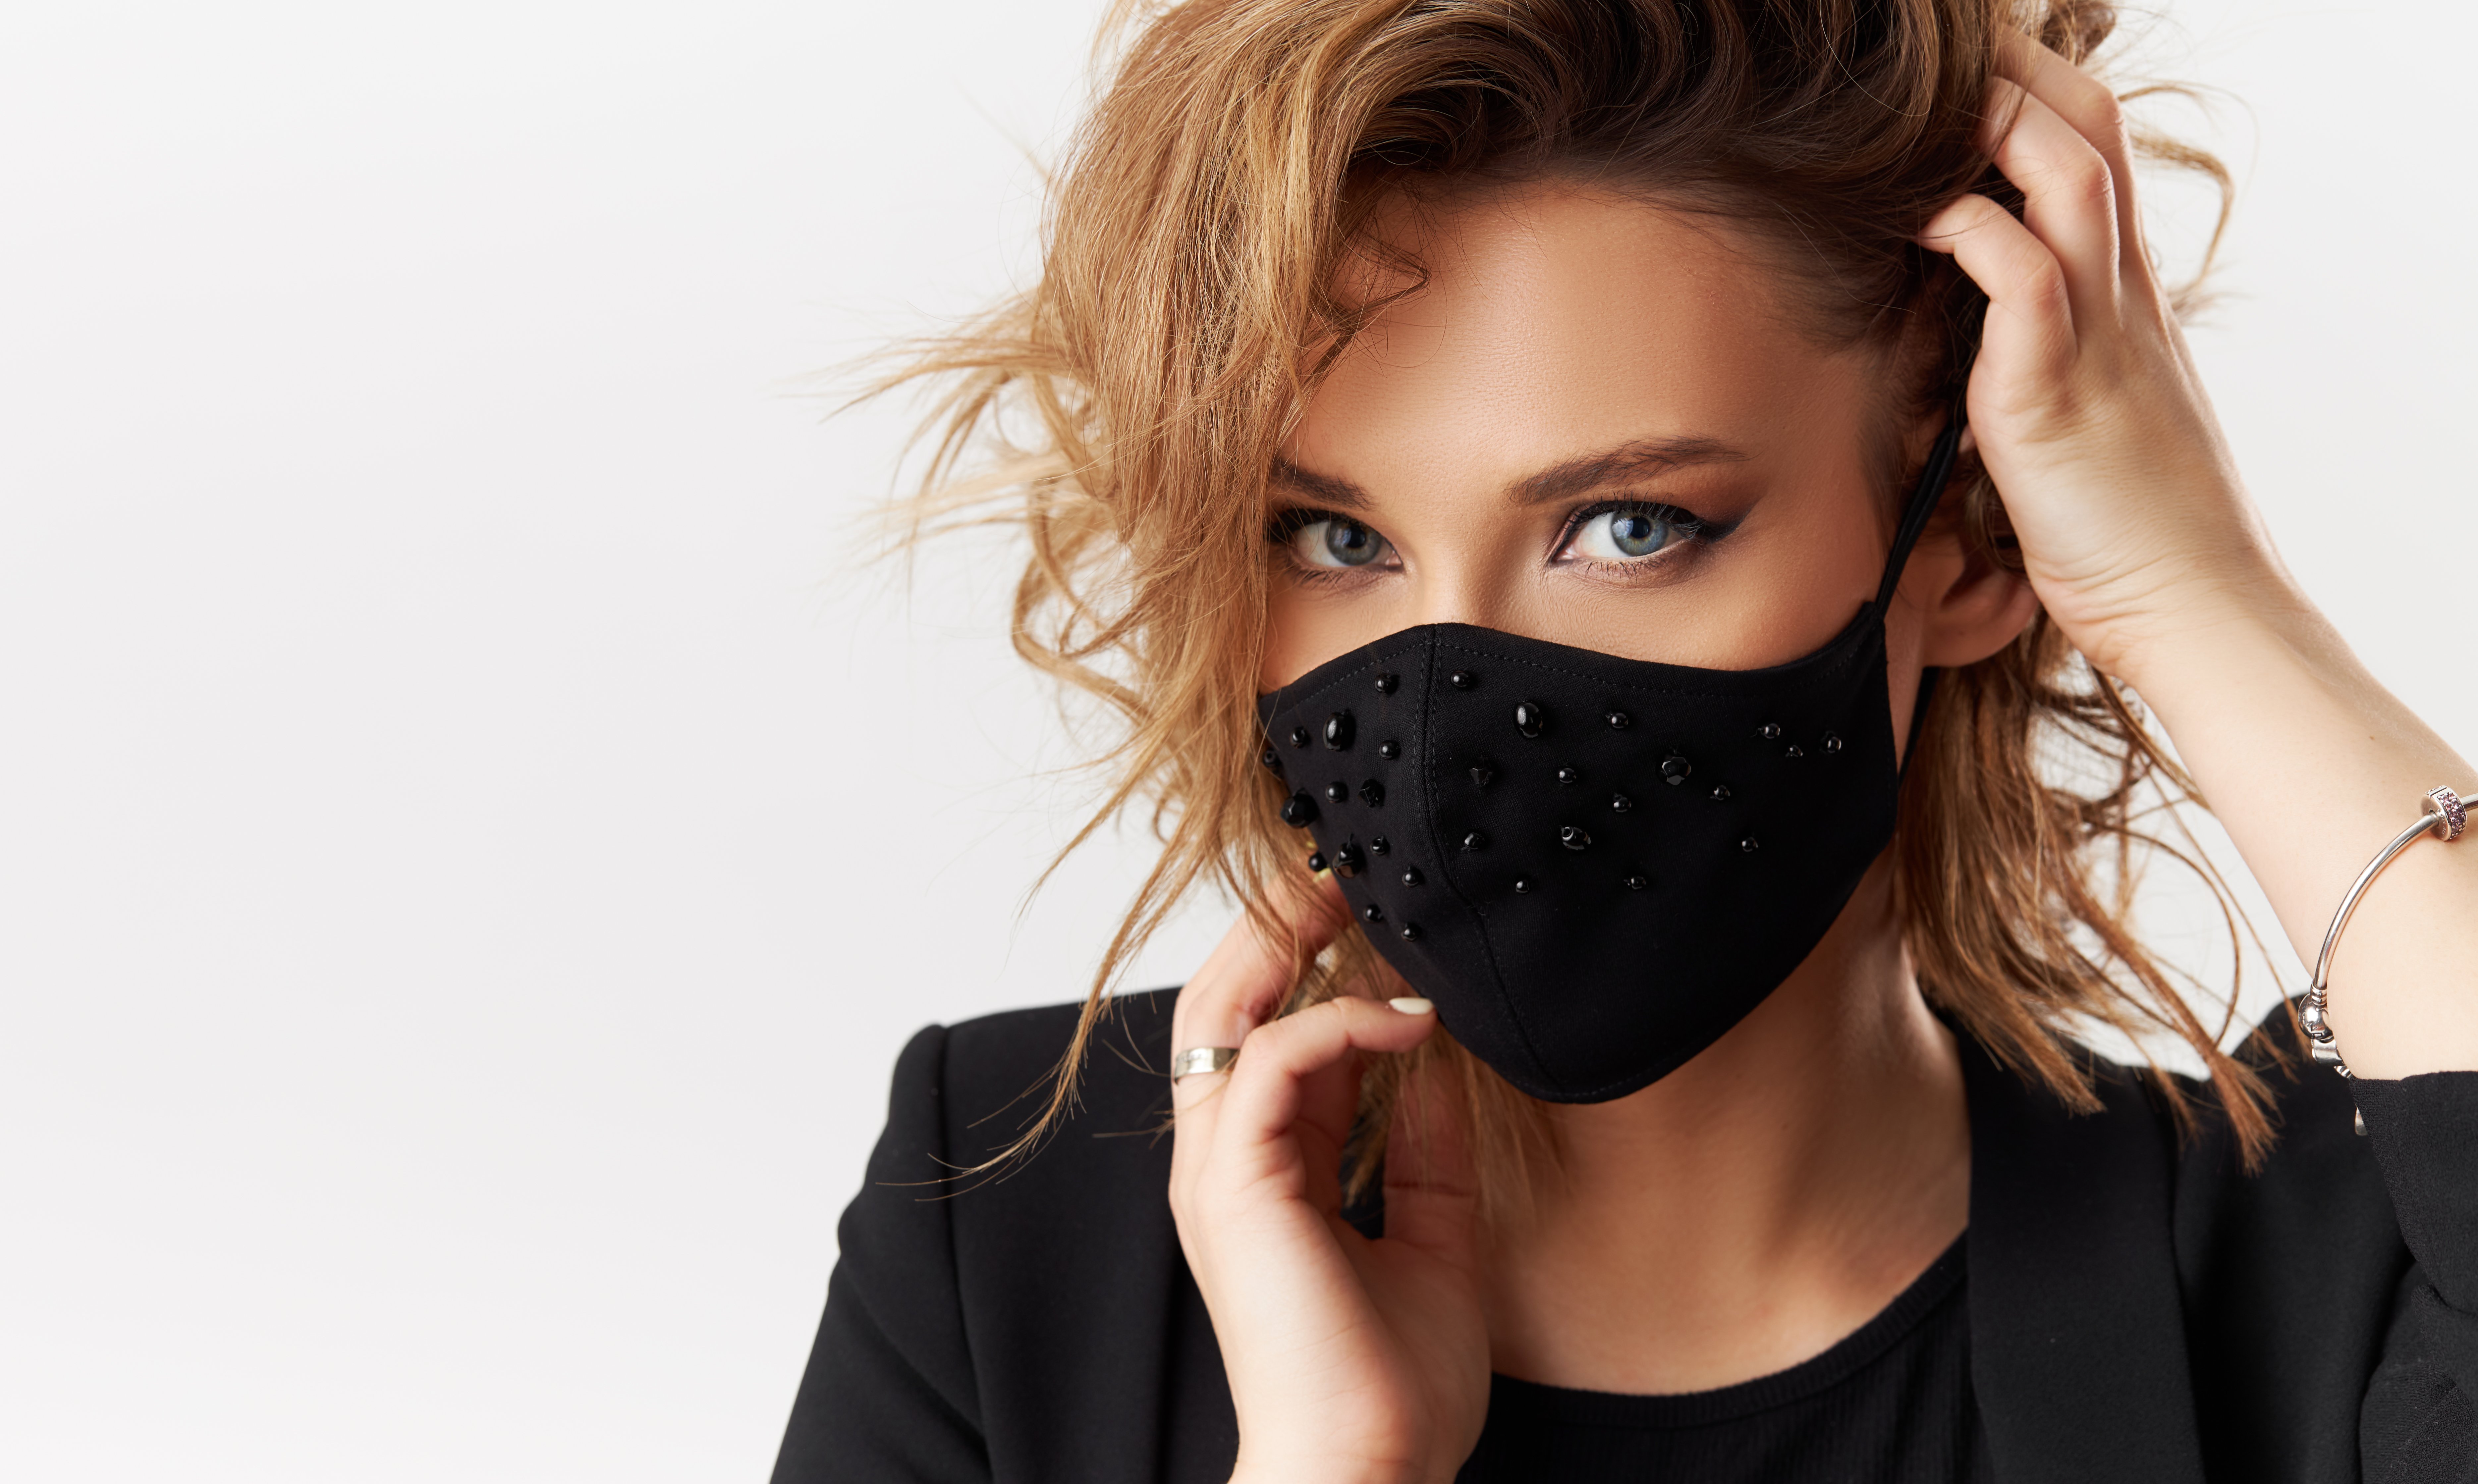 Beautiful woman with a face mask. | Source: Getty Images